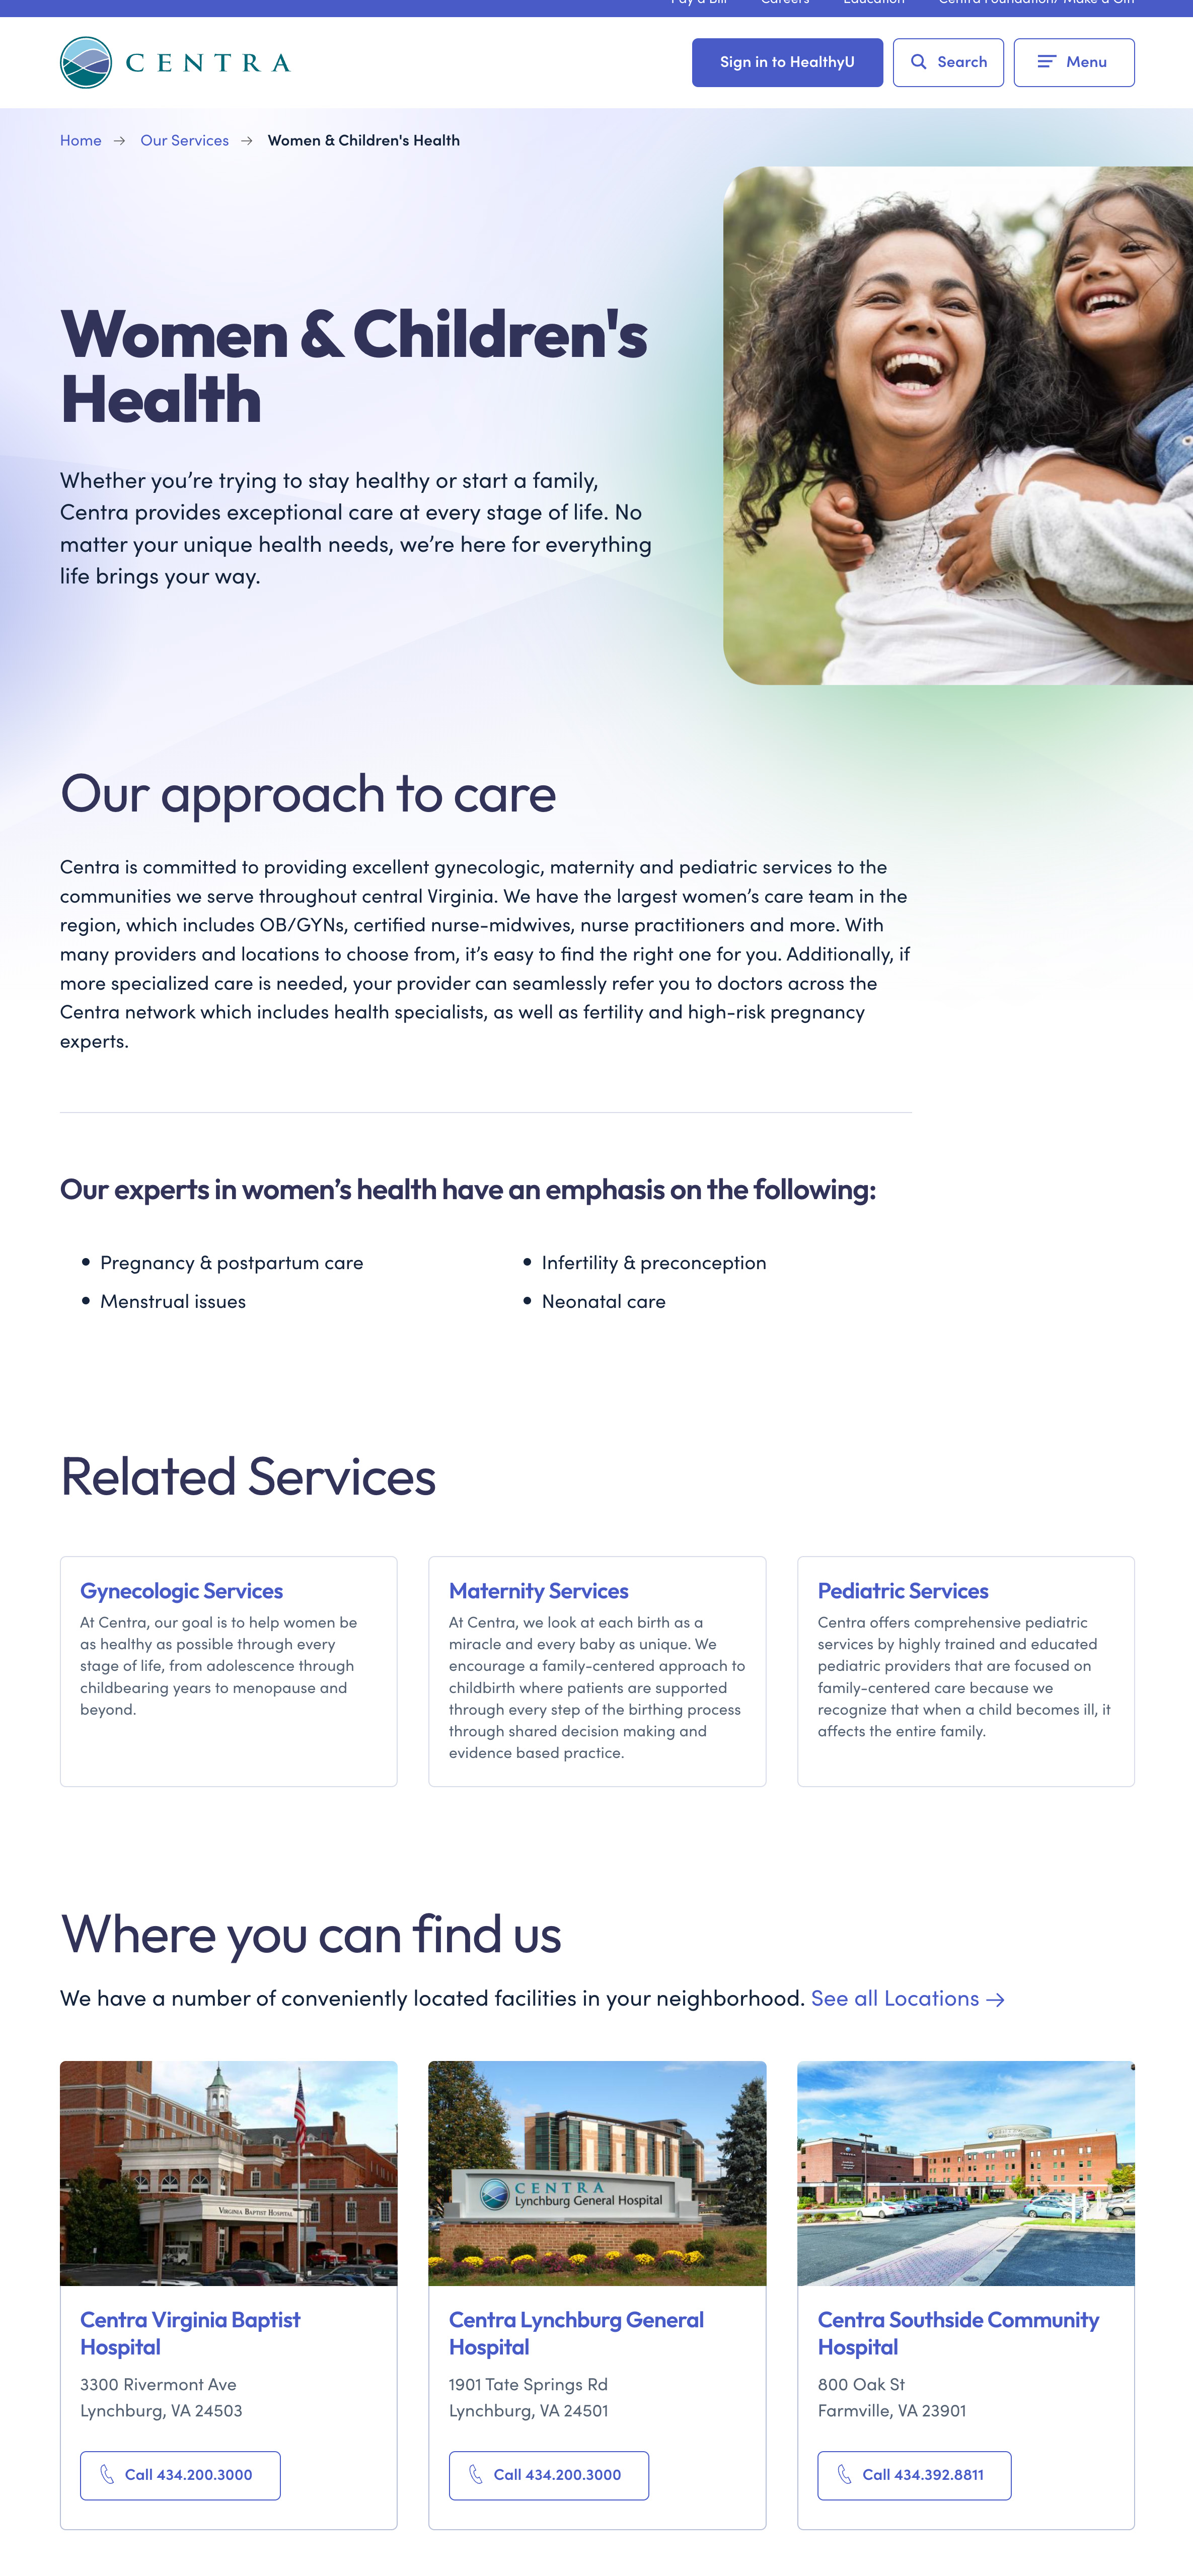 Image of Centra Health's new Women & Children Health service page